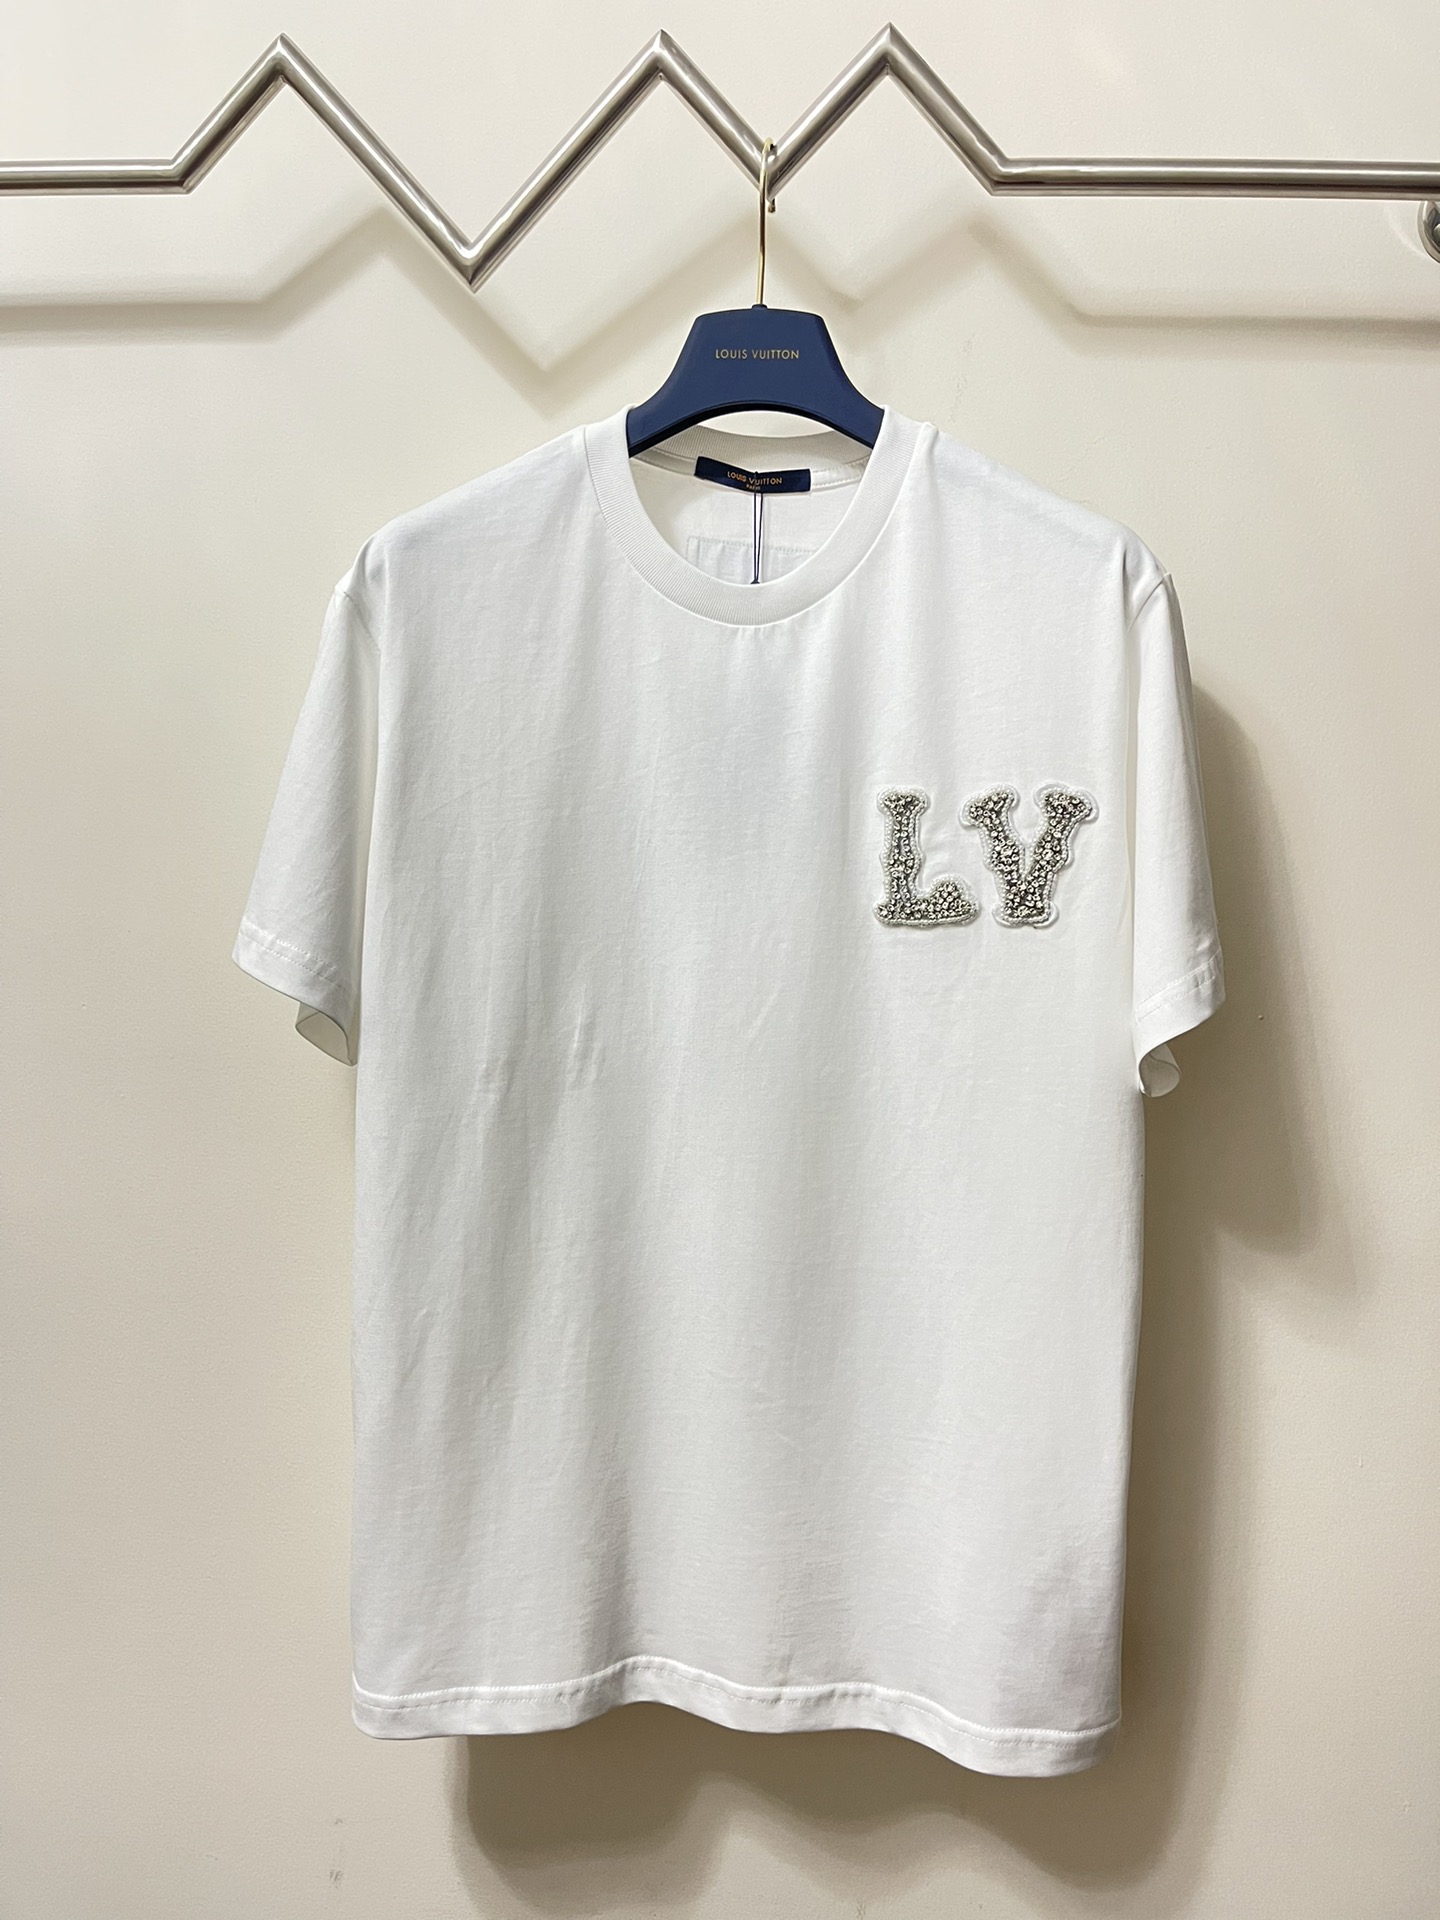 Louis Vuitton Buy
 Clothing T-Shirt Wholesale Replica
 Red Embroidery Unisex Cotton Spring/Summer Collection Short Sleeve